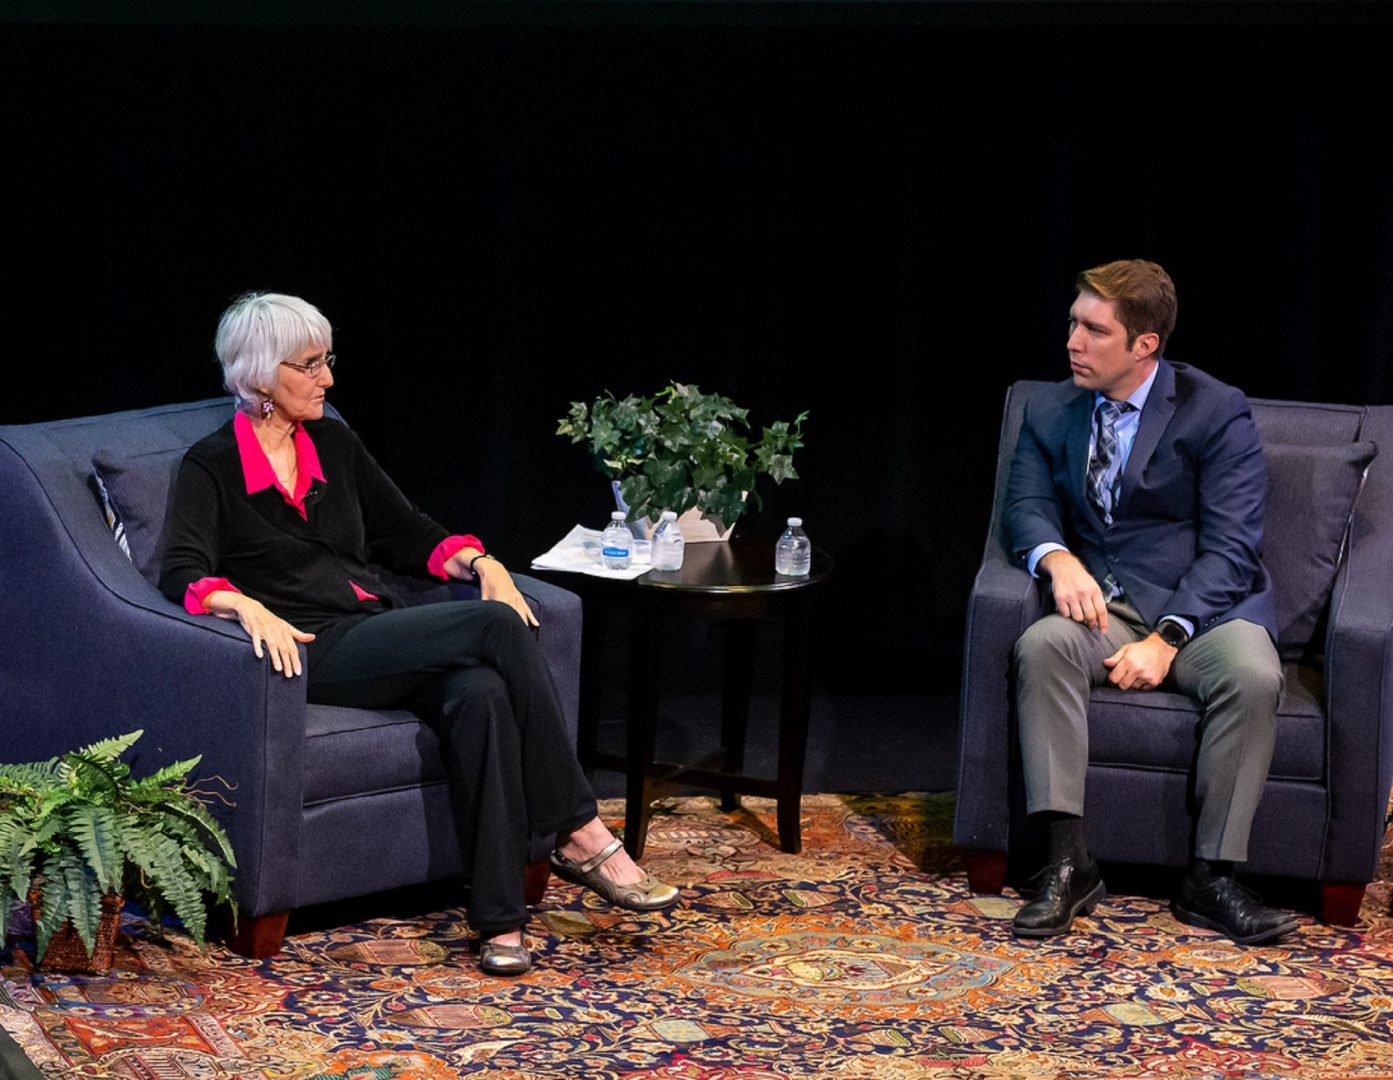 Sue Klebold, an advocate of mental health awareness and mother of one of the Columbine High School shooters, speaks with Transforming Health reporter Brett Sholtis at Penn State Harrisburg on September 16, 2019.
